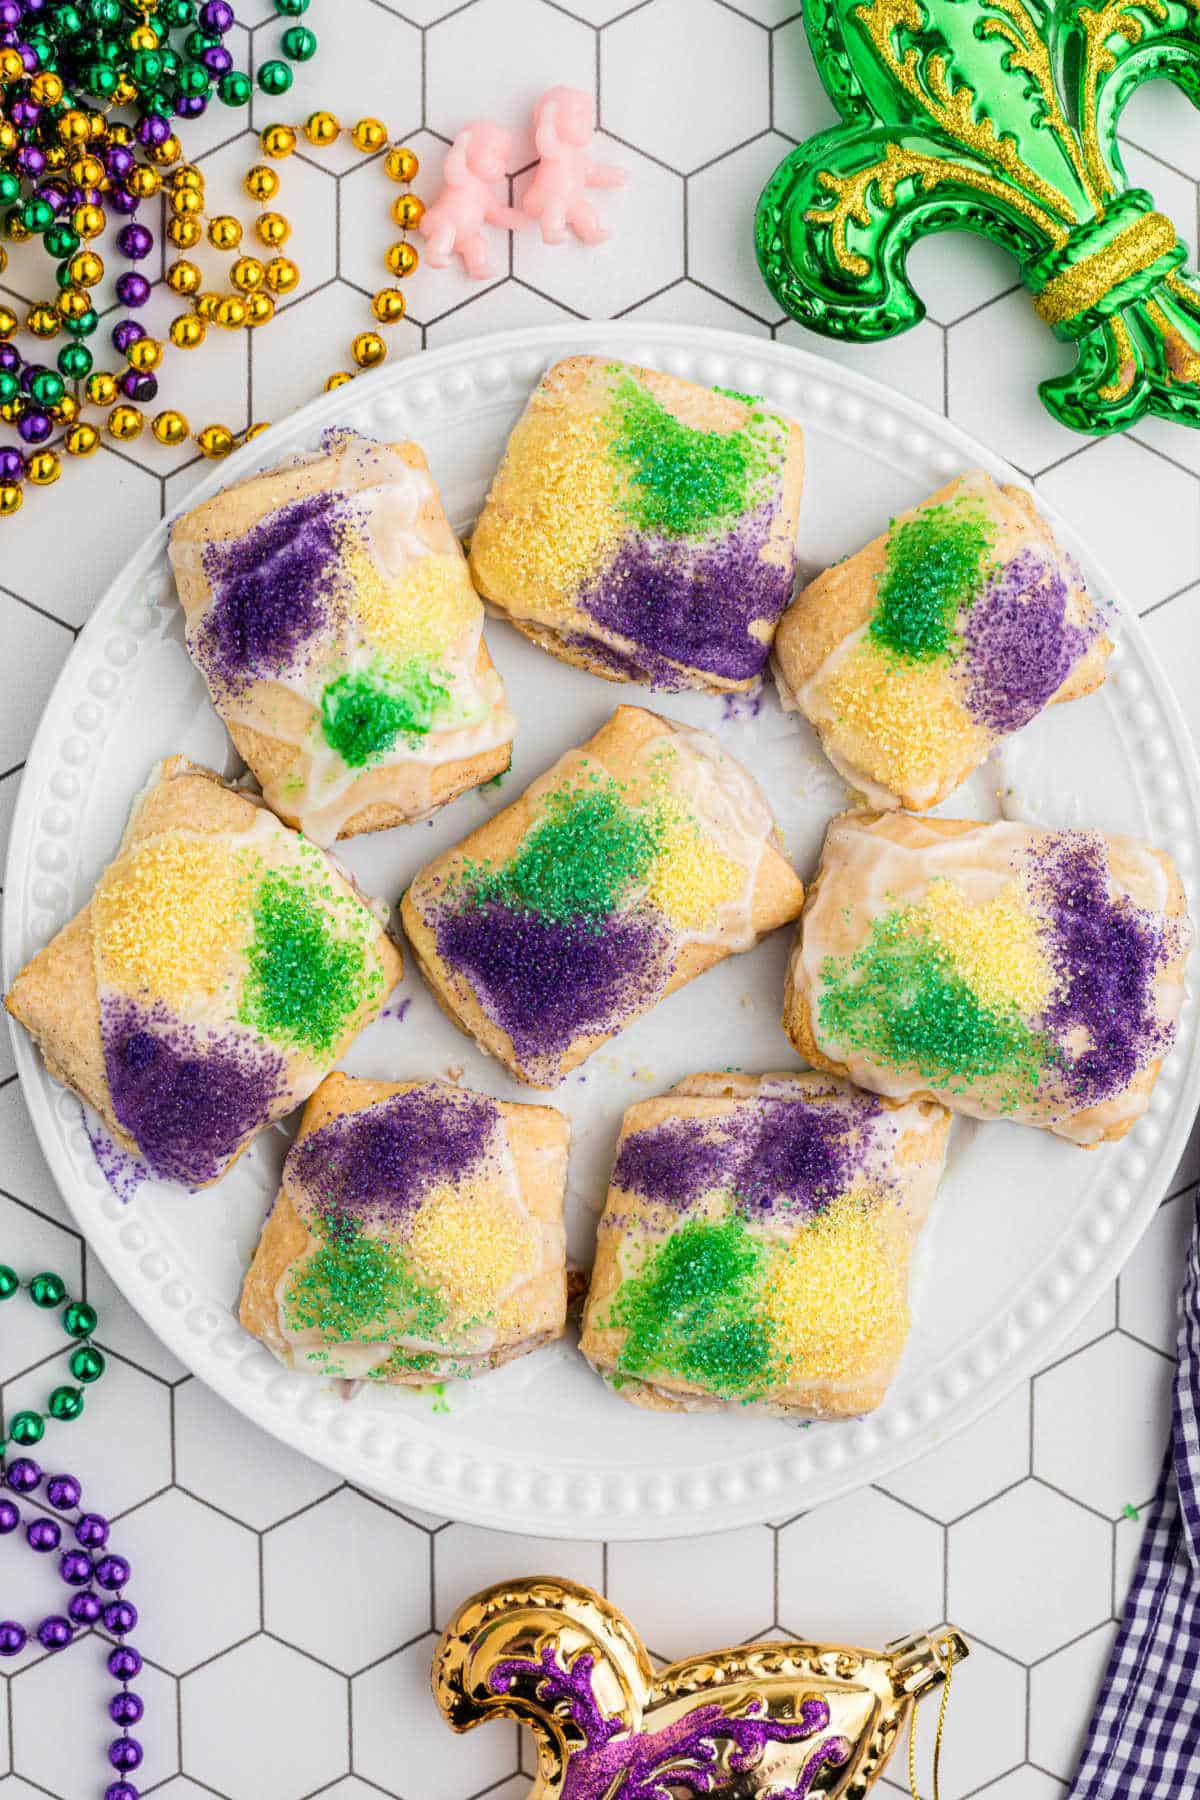 Overhead shot of a plate of king cake bites.